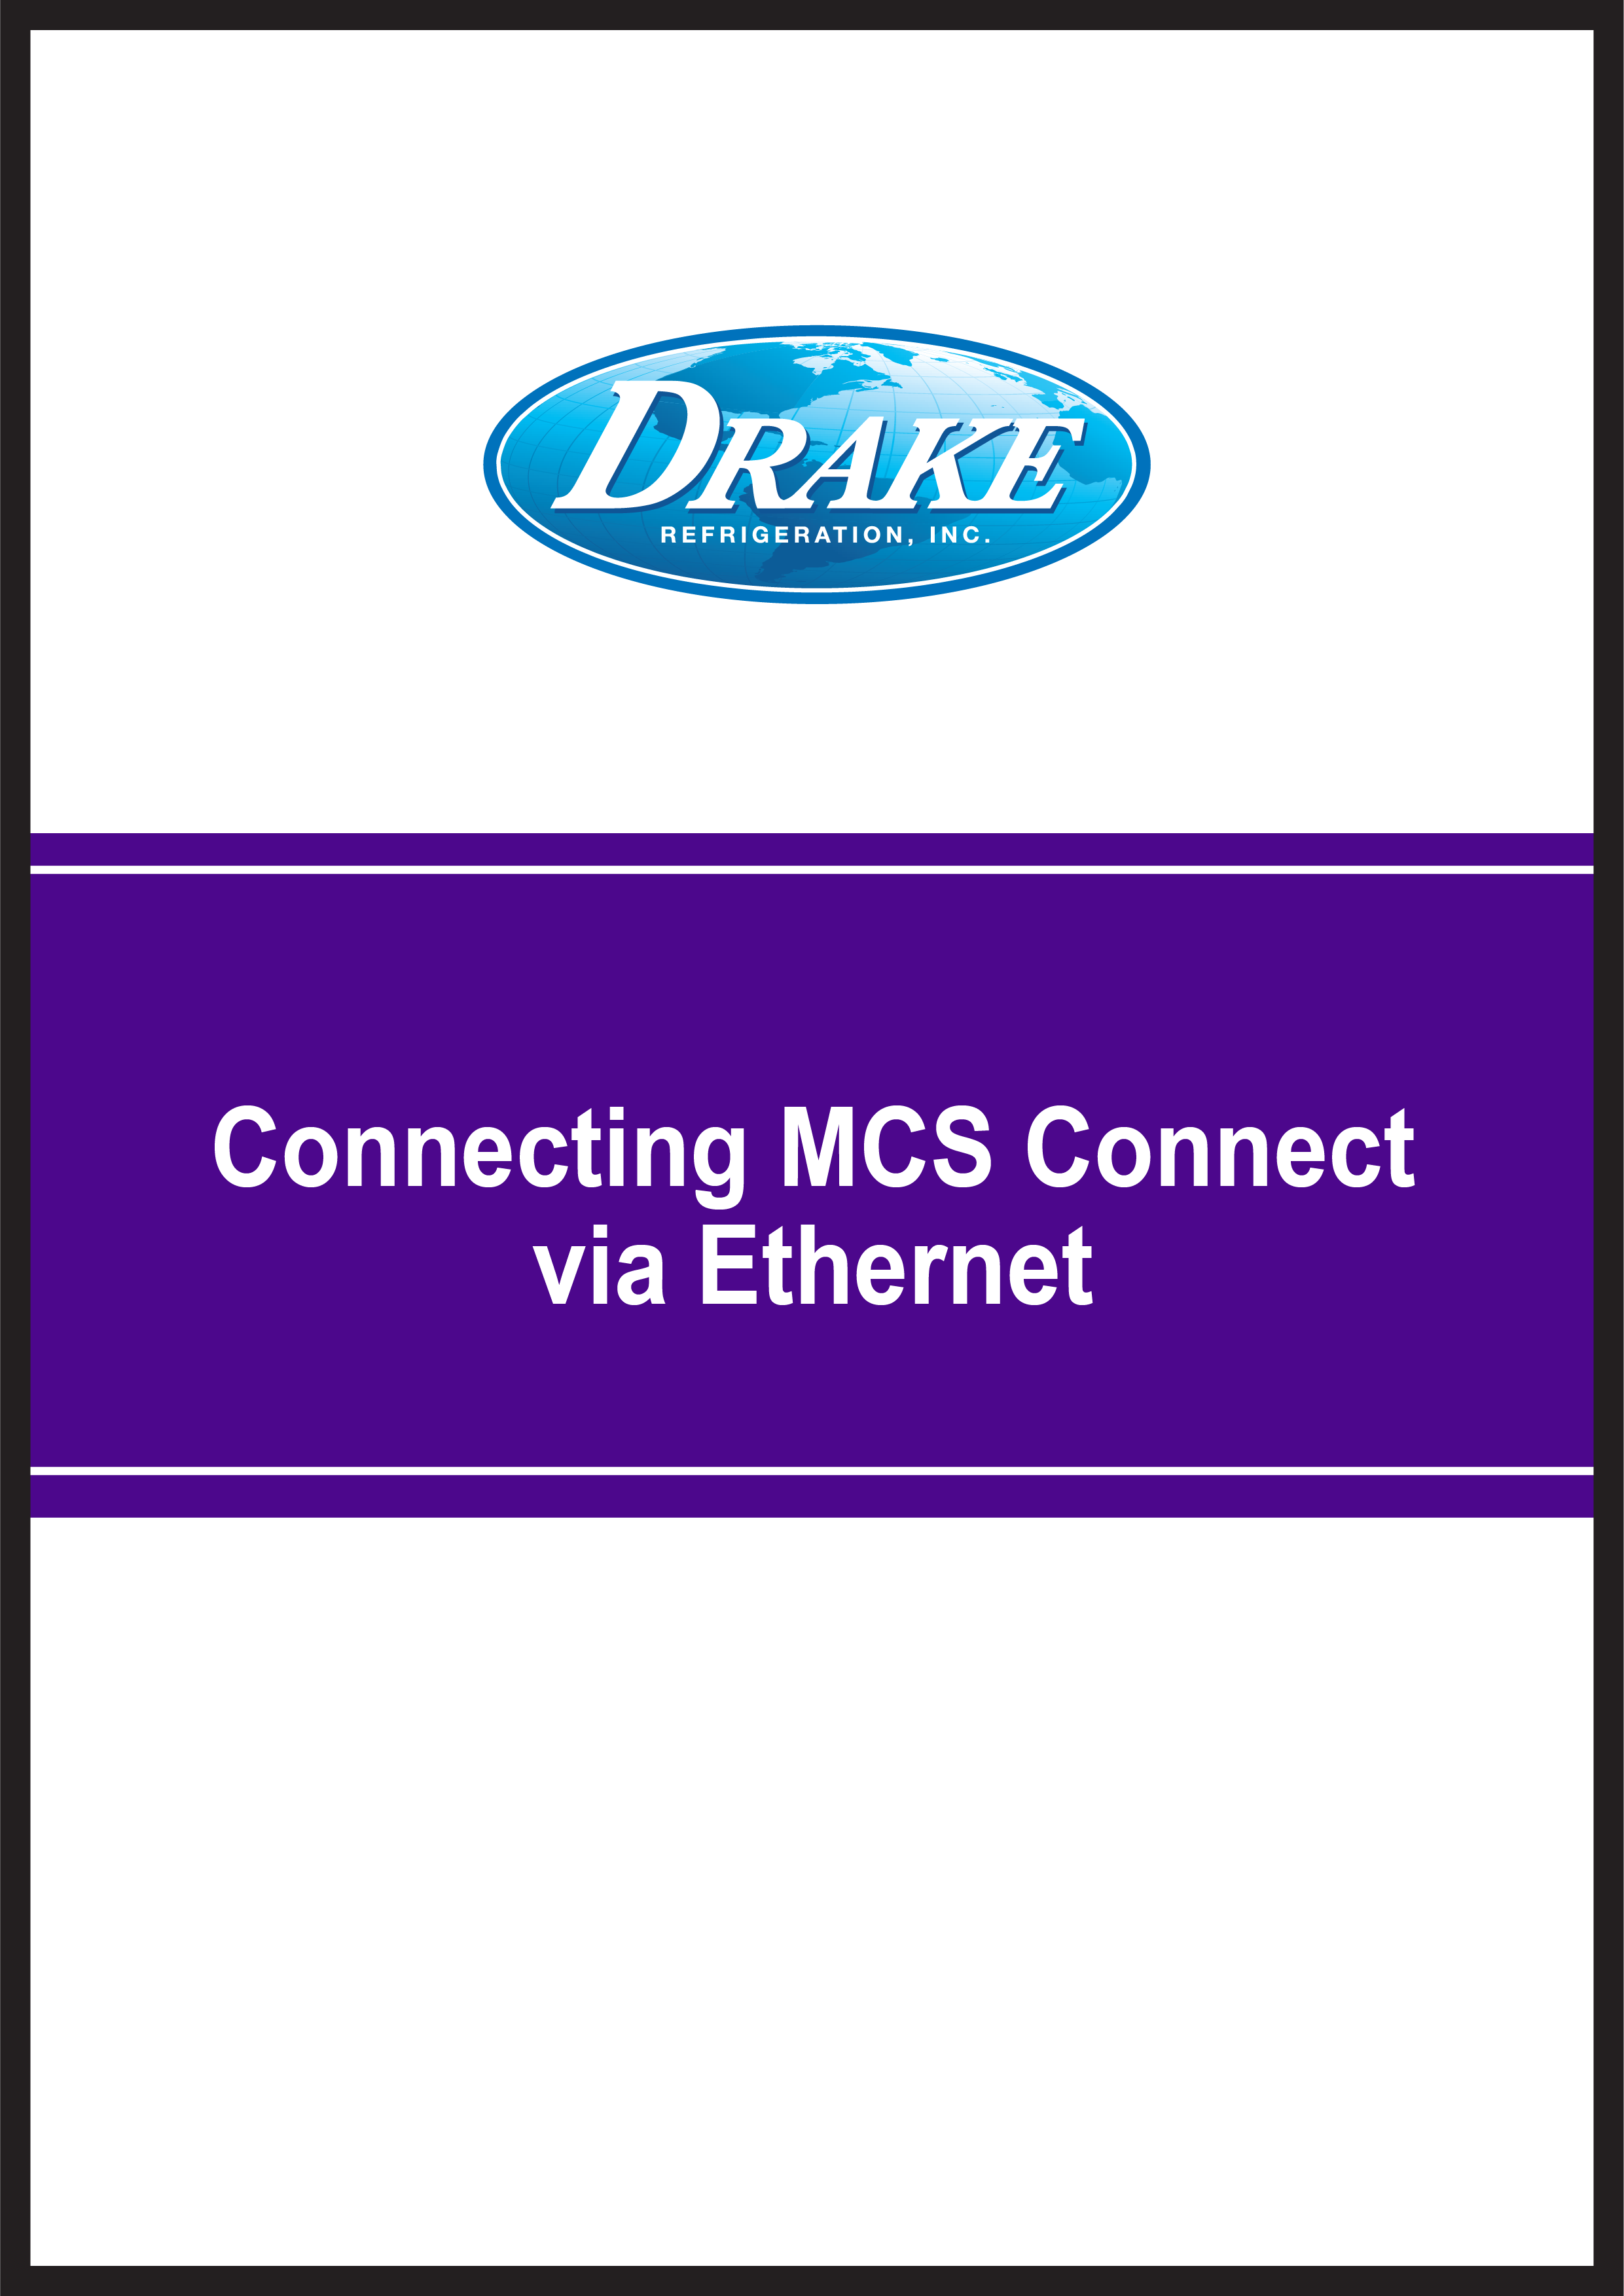 Web Template Connecting MCS Connect via Ethernet.png